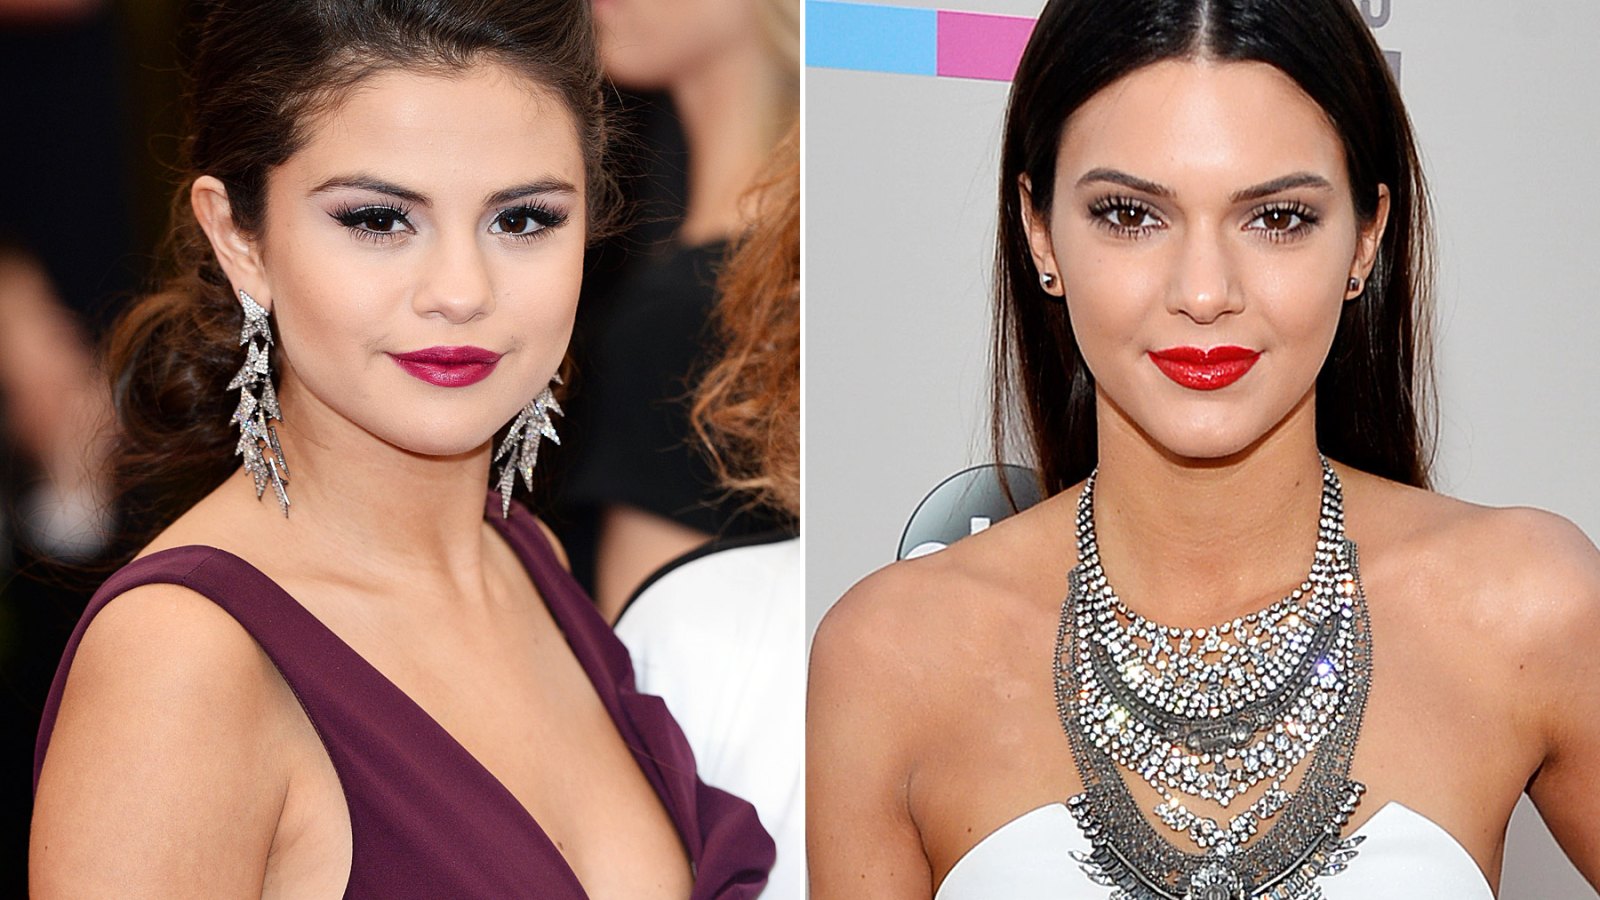 Selena Gomez and Kendall Jenner